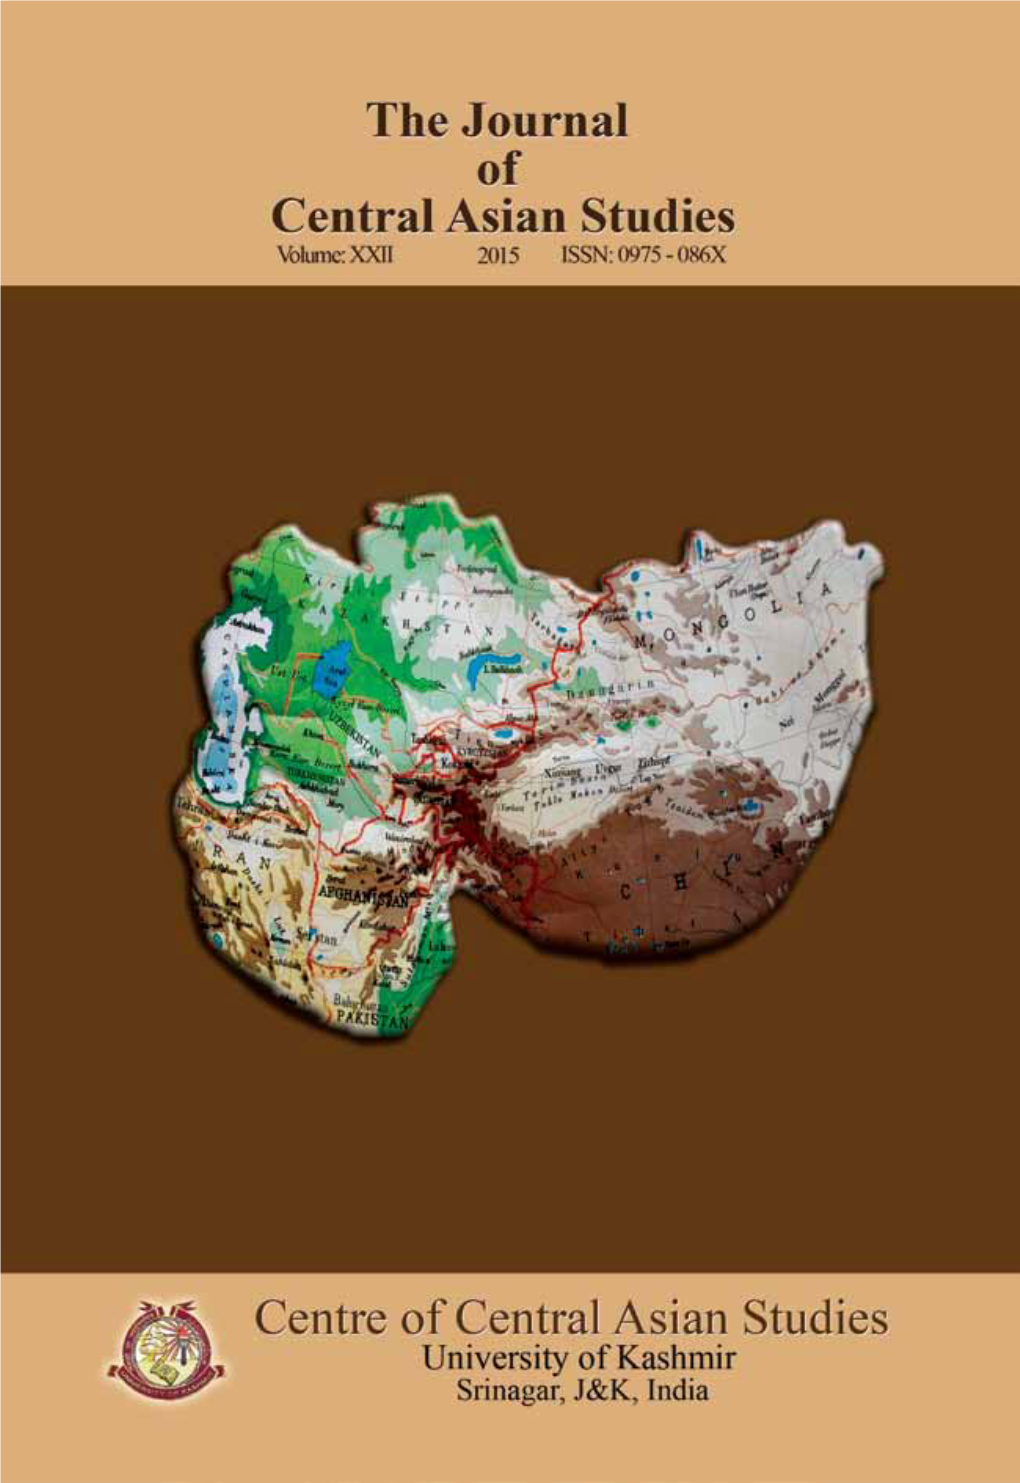 THE JOURNAL of CENTRAL ASIAN STUDIES Volume: XXII 2015 ISSN: 0975-086X